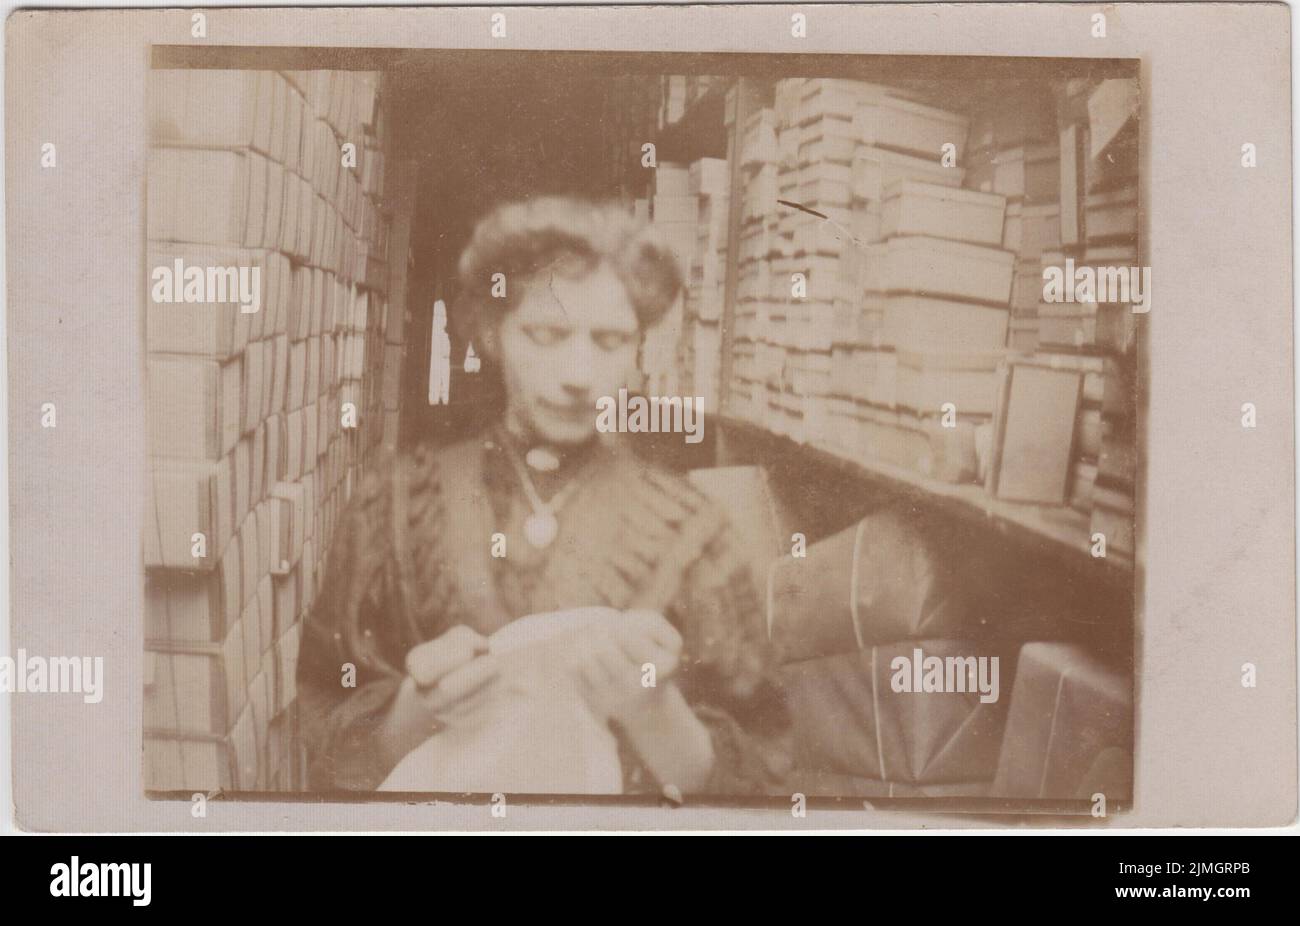 Woman photographed in the storeroom of a shop or warehouse in the Hackney area of London, early 20th century. She is examining a piece of fabric, and boxes and parcels tied up with brown paper and string are on the shelves behind her Stock Photo